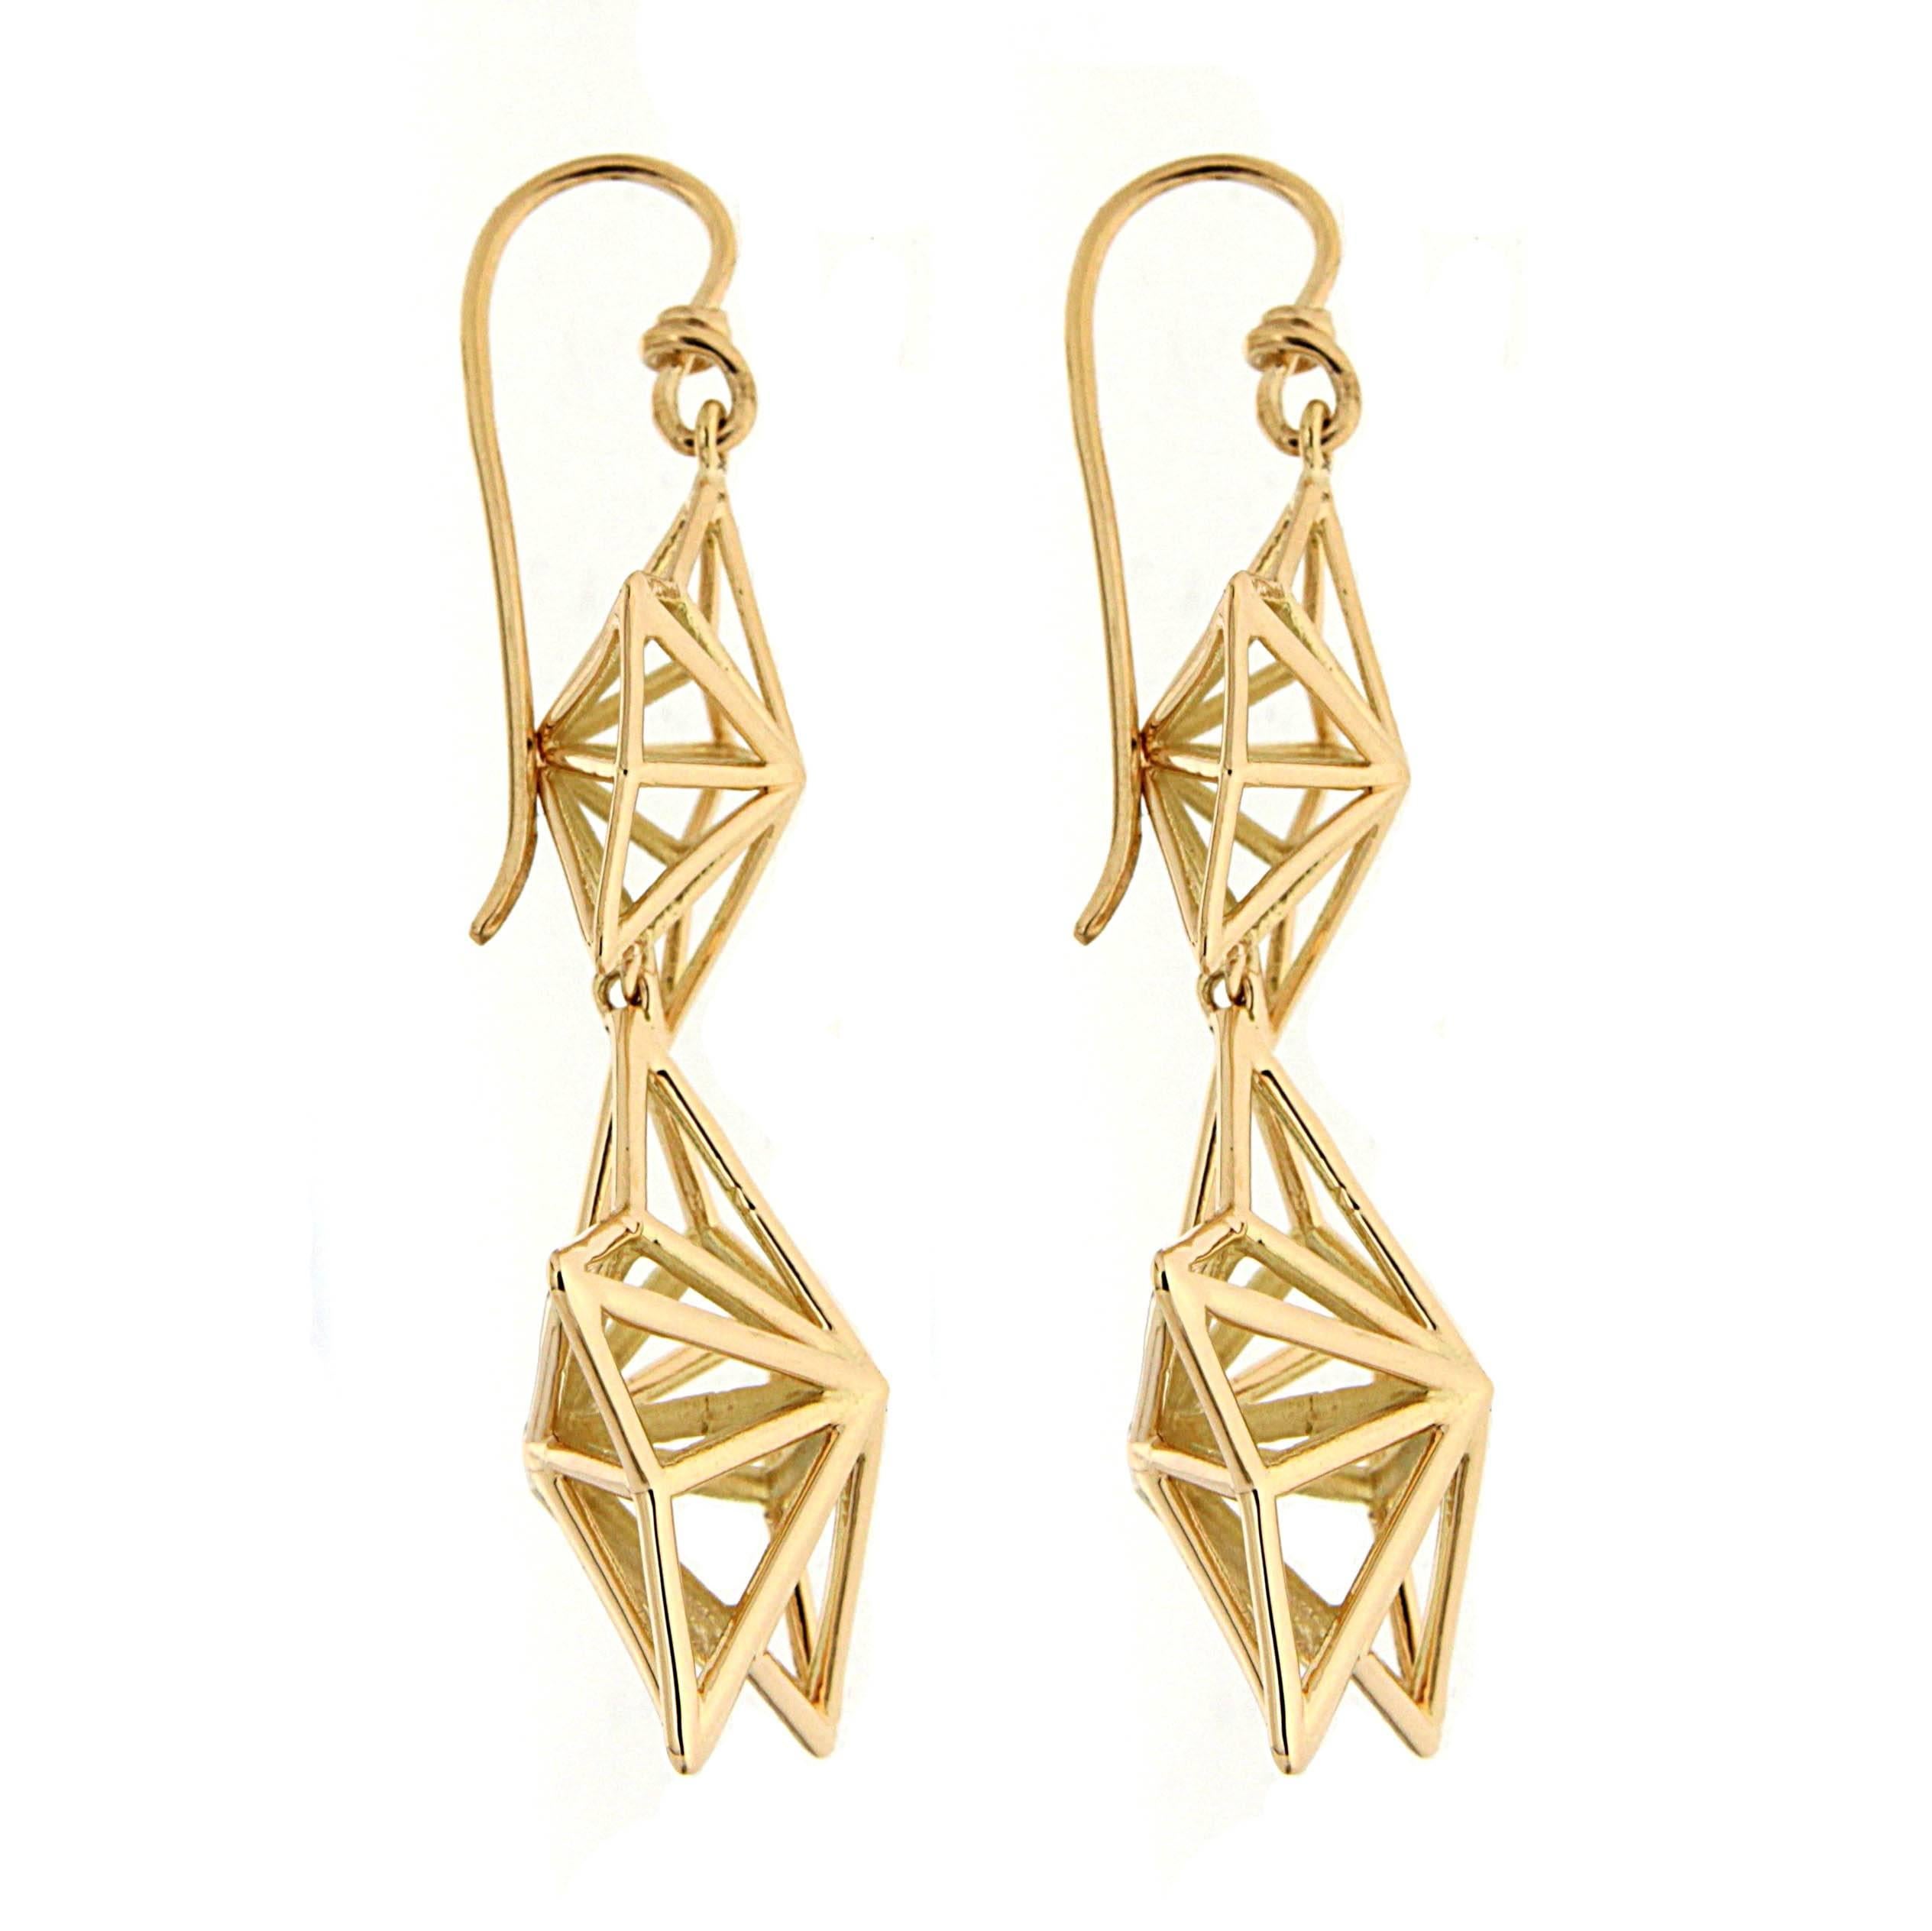 This lovely pair of 3 dimensional dangling stars earrings is made in 18kt yellow gold.